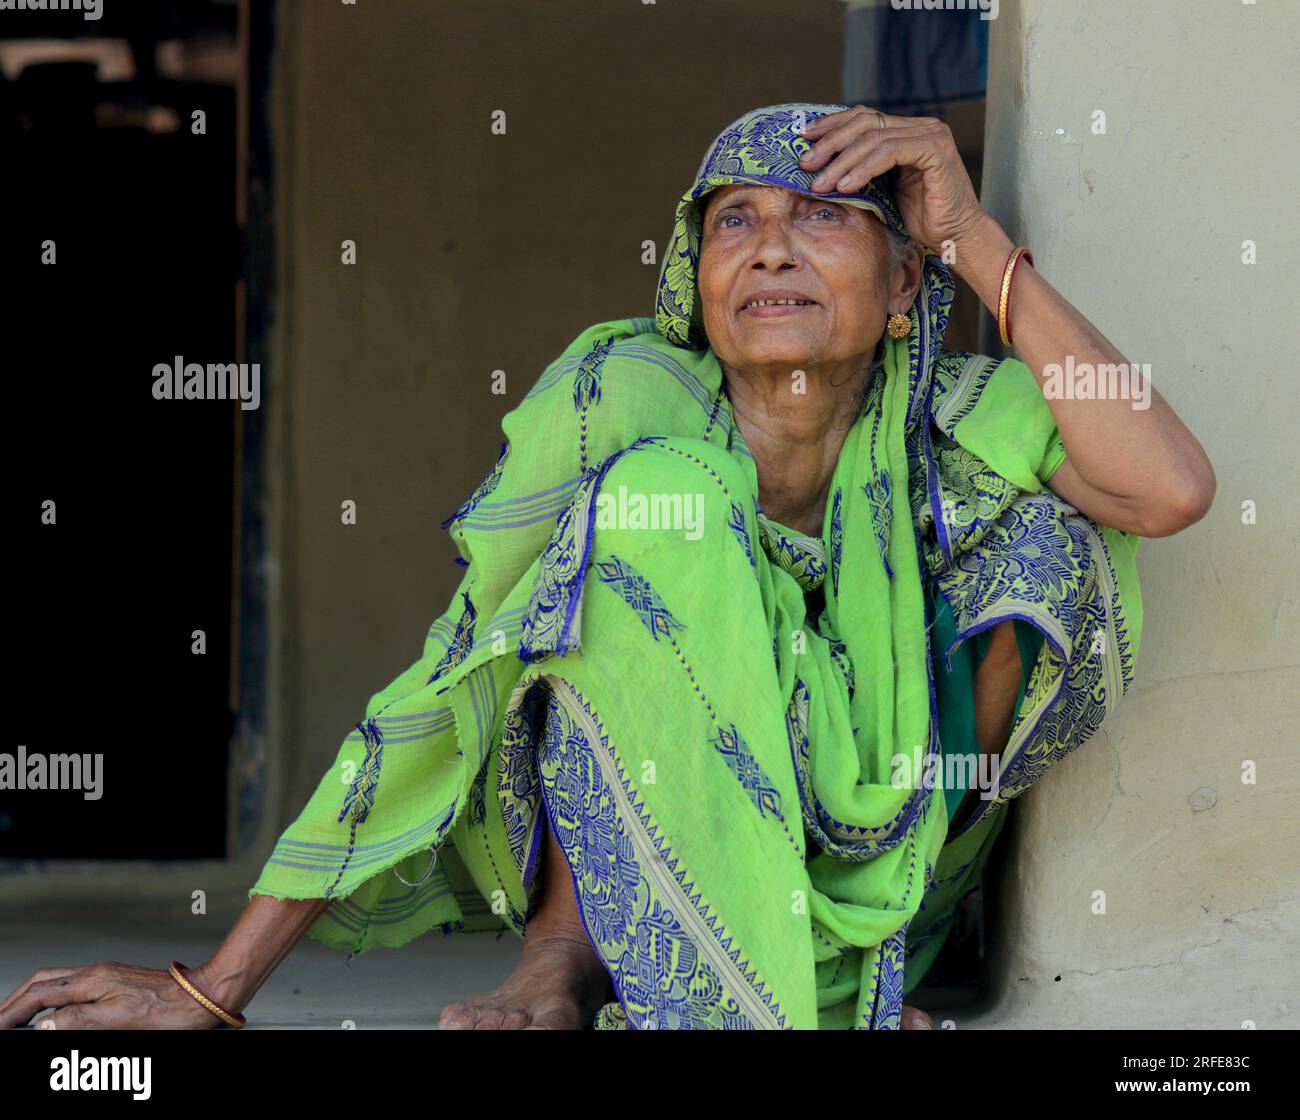 A 70 year old Indian woman sitting on the ground with green saree. A normal day in Indian village life. Stock Photo